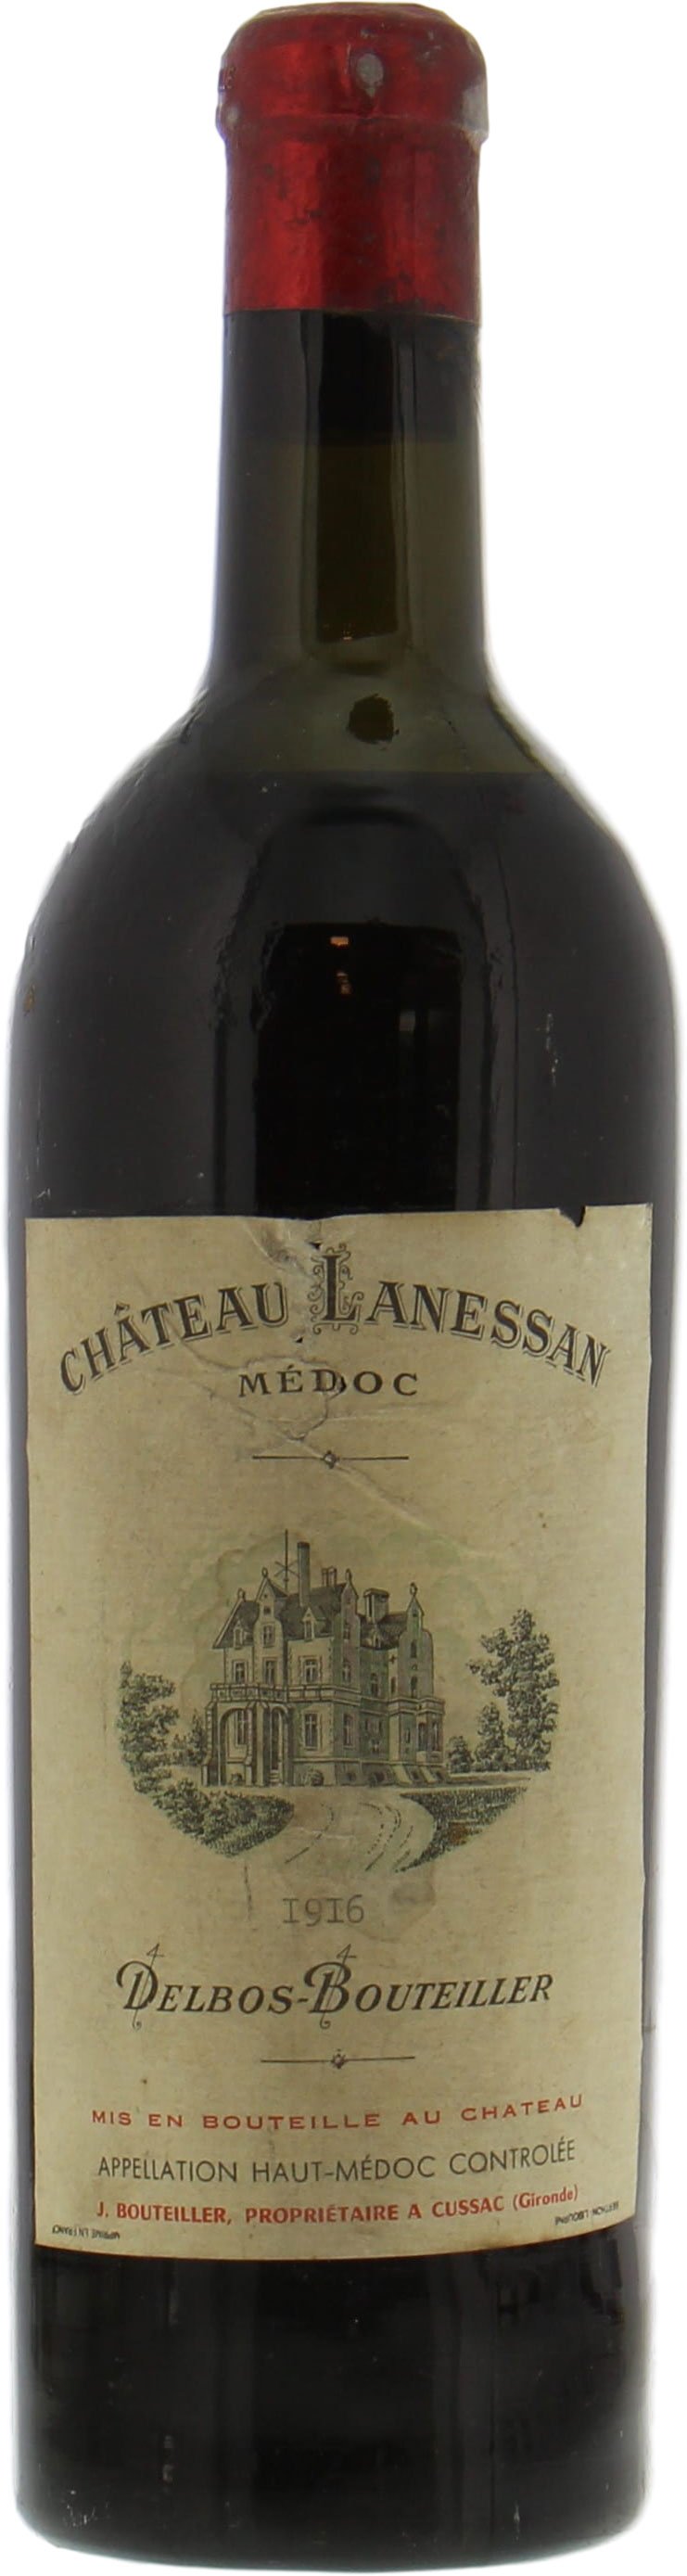 Chateau Lanessan - Chateau Lanessan 1916 High shoulder, very good condition